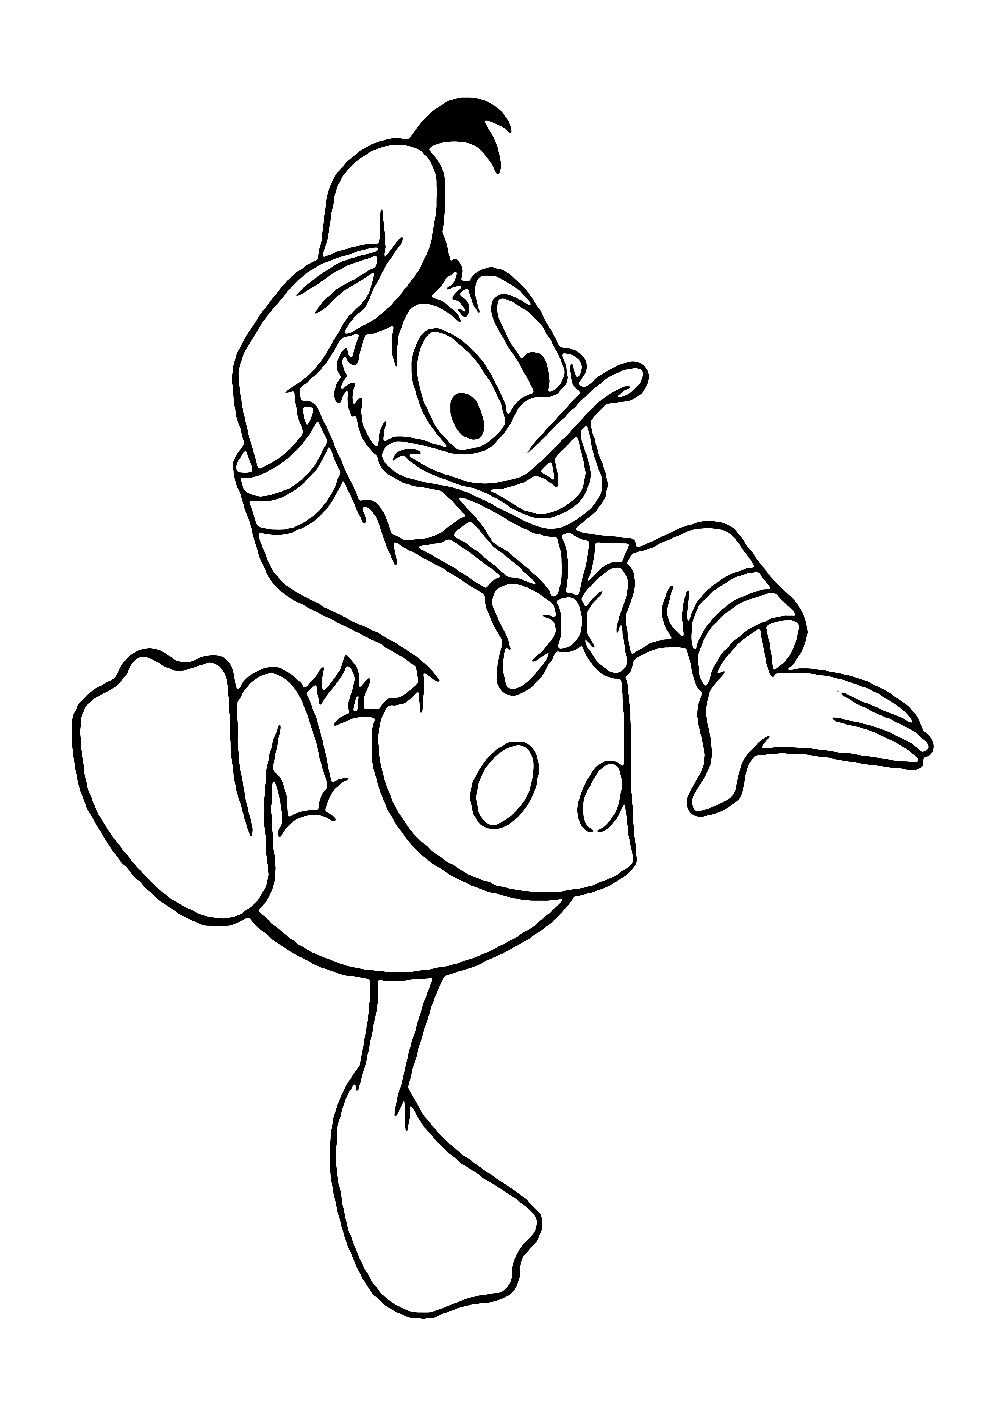 Donald Duck Coloring Page, Duck, Sailor